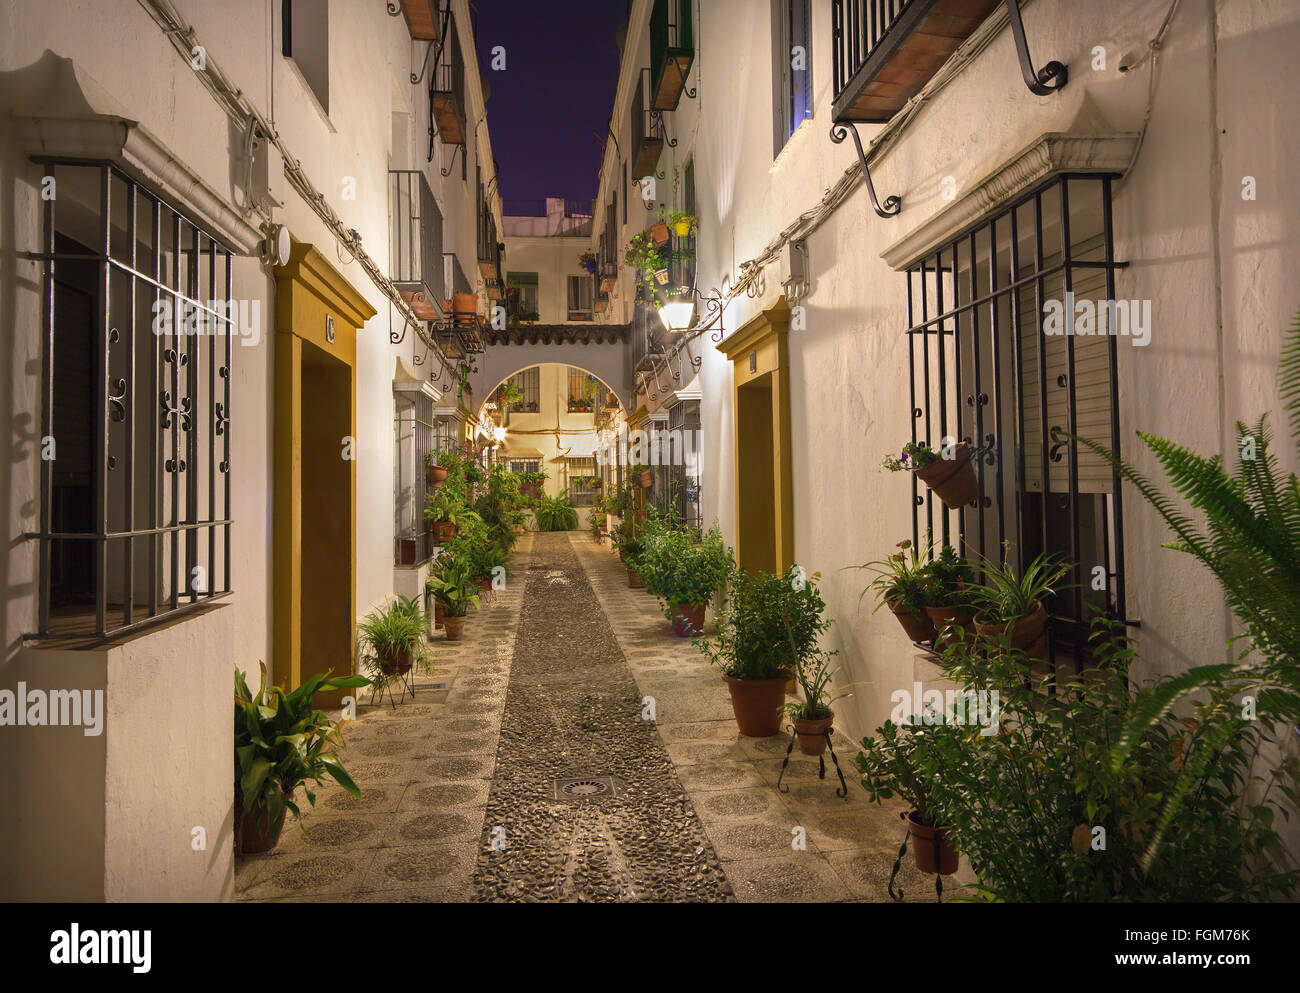 Cordoba - The beautiful decorated aisle in the centre of old town at night Stock Photo